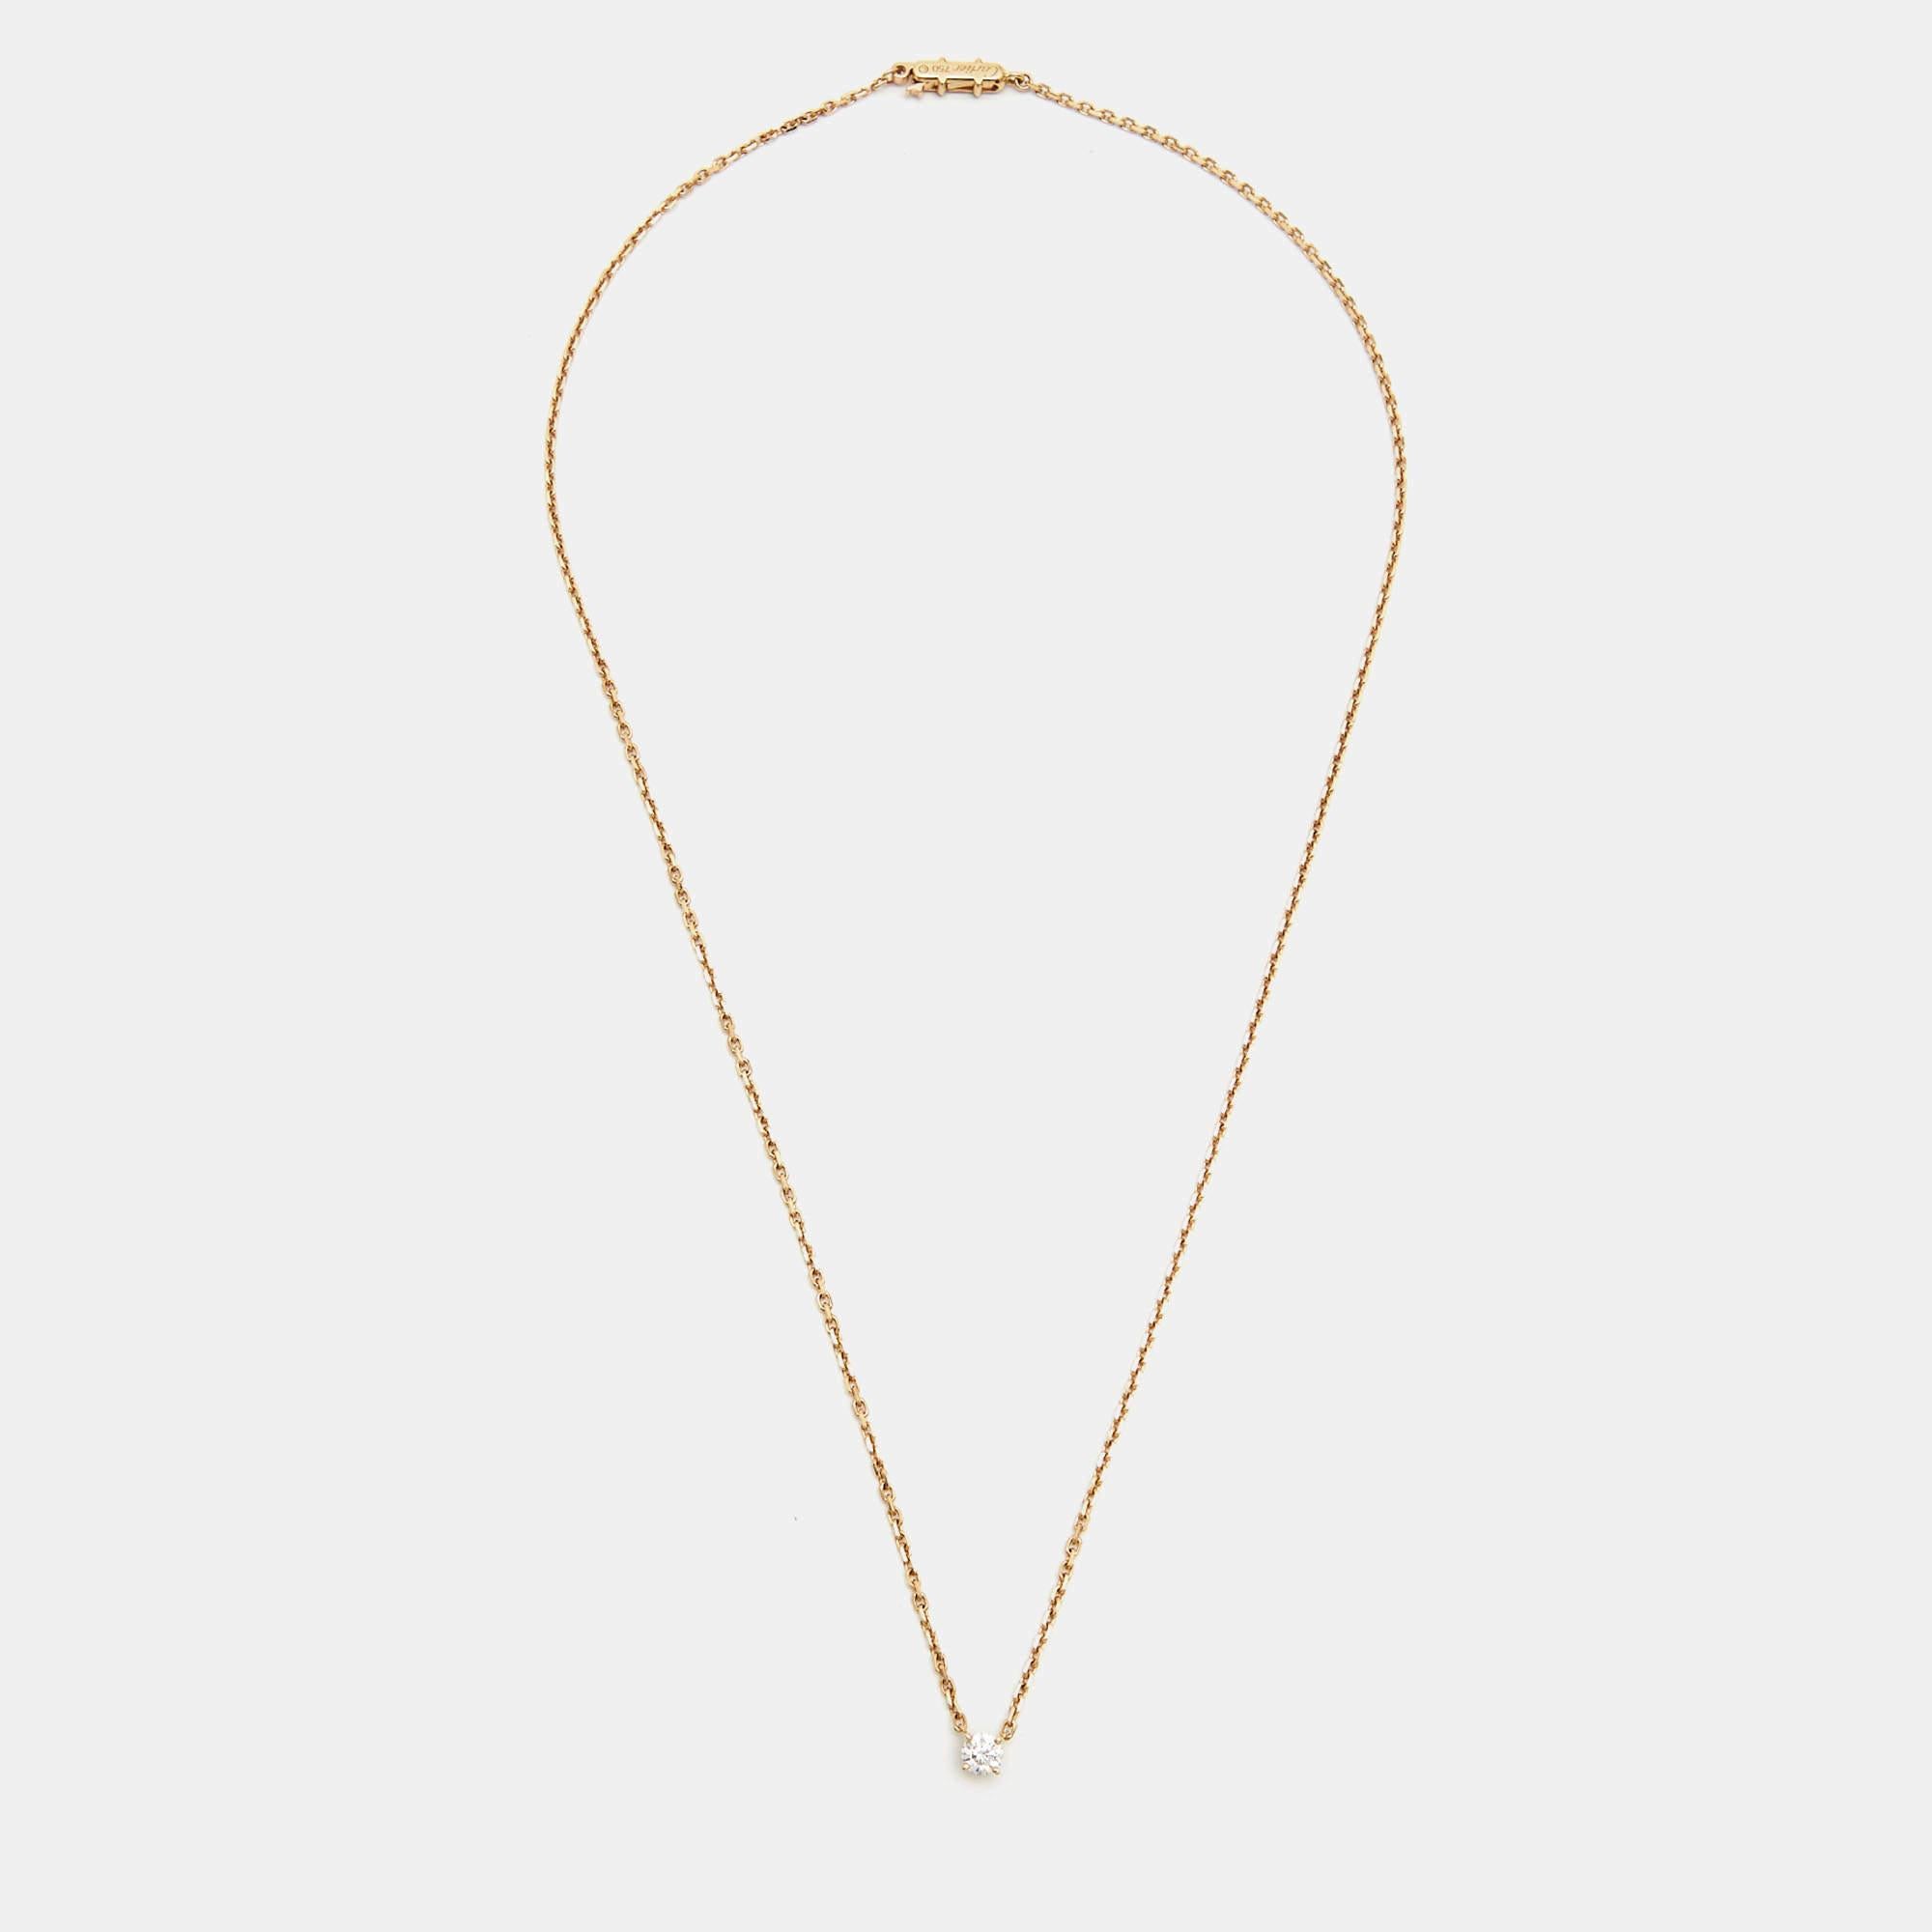 The use of precious materials, coupled with heritage artisanship, makes this necklace a creation worth cherishing. It sits gracefully on any neck.

